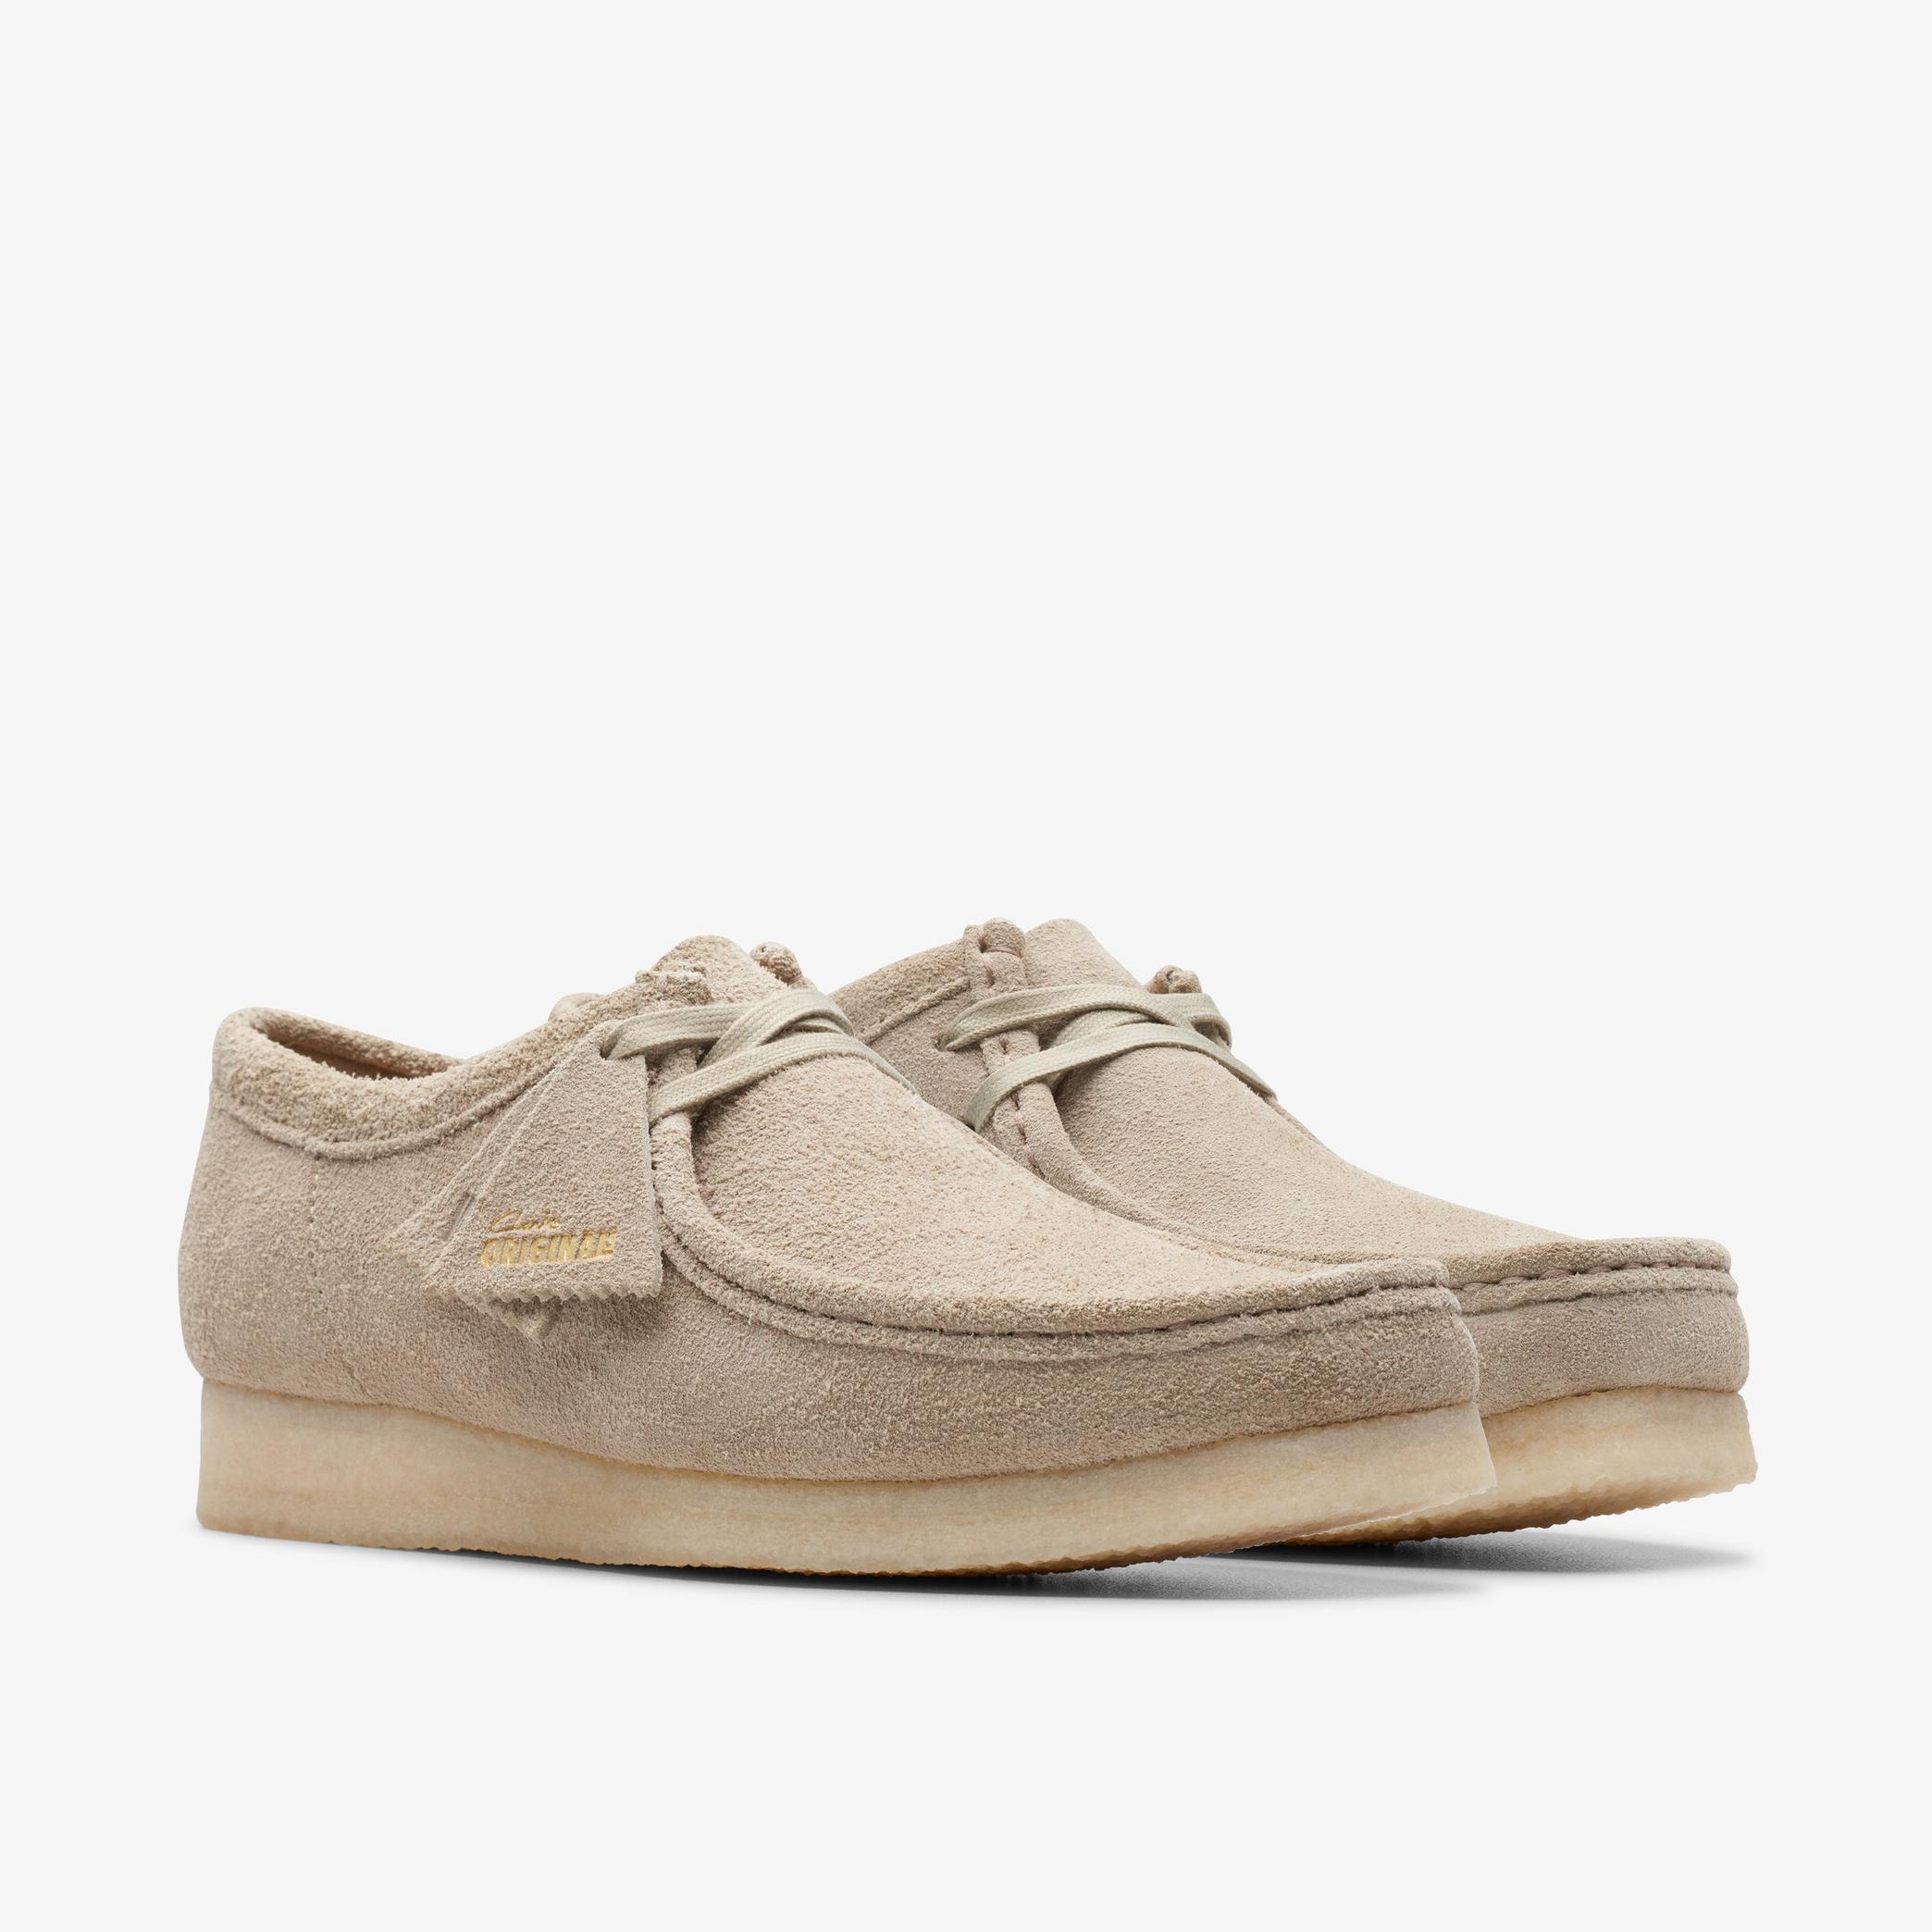 Wallabee Pale Grey Suede Wallabee, view 4 of 7